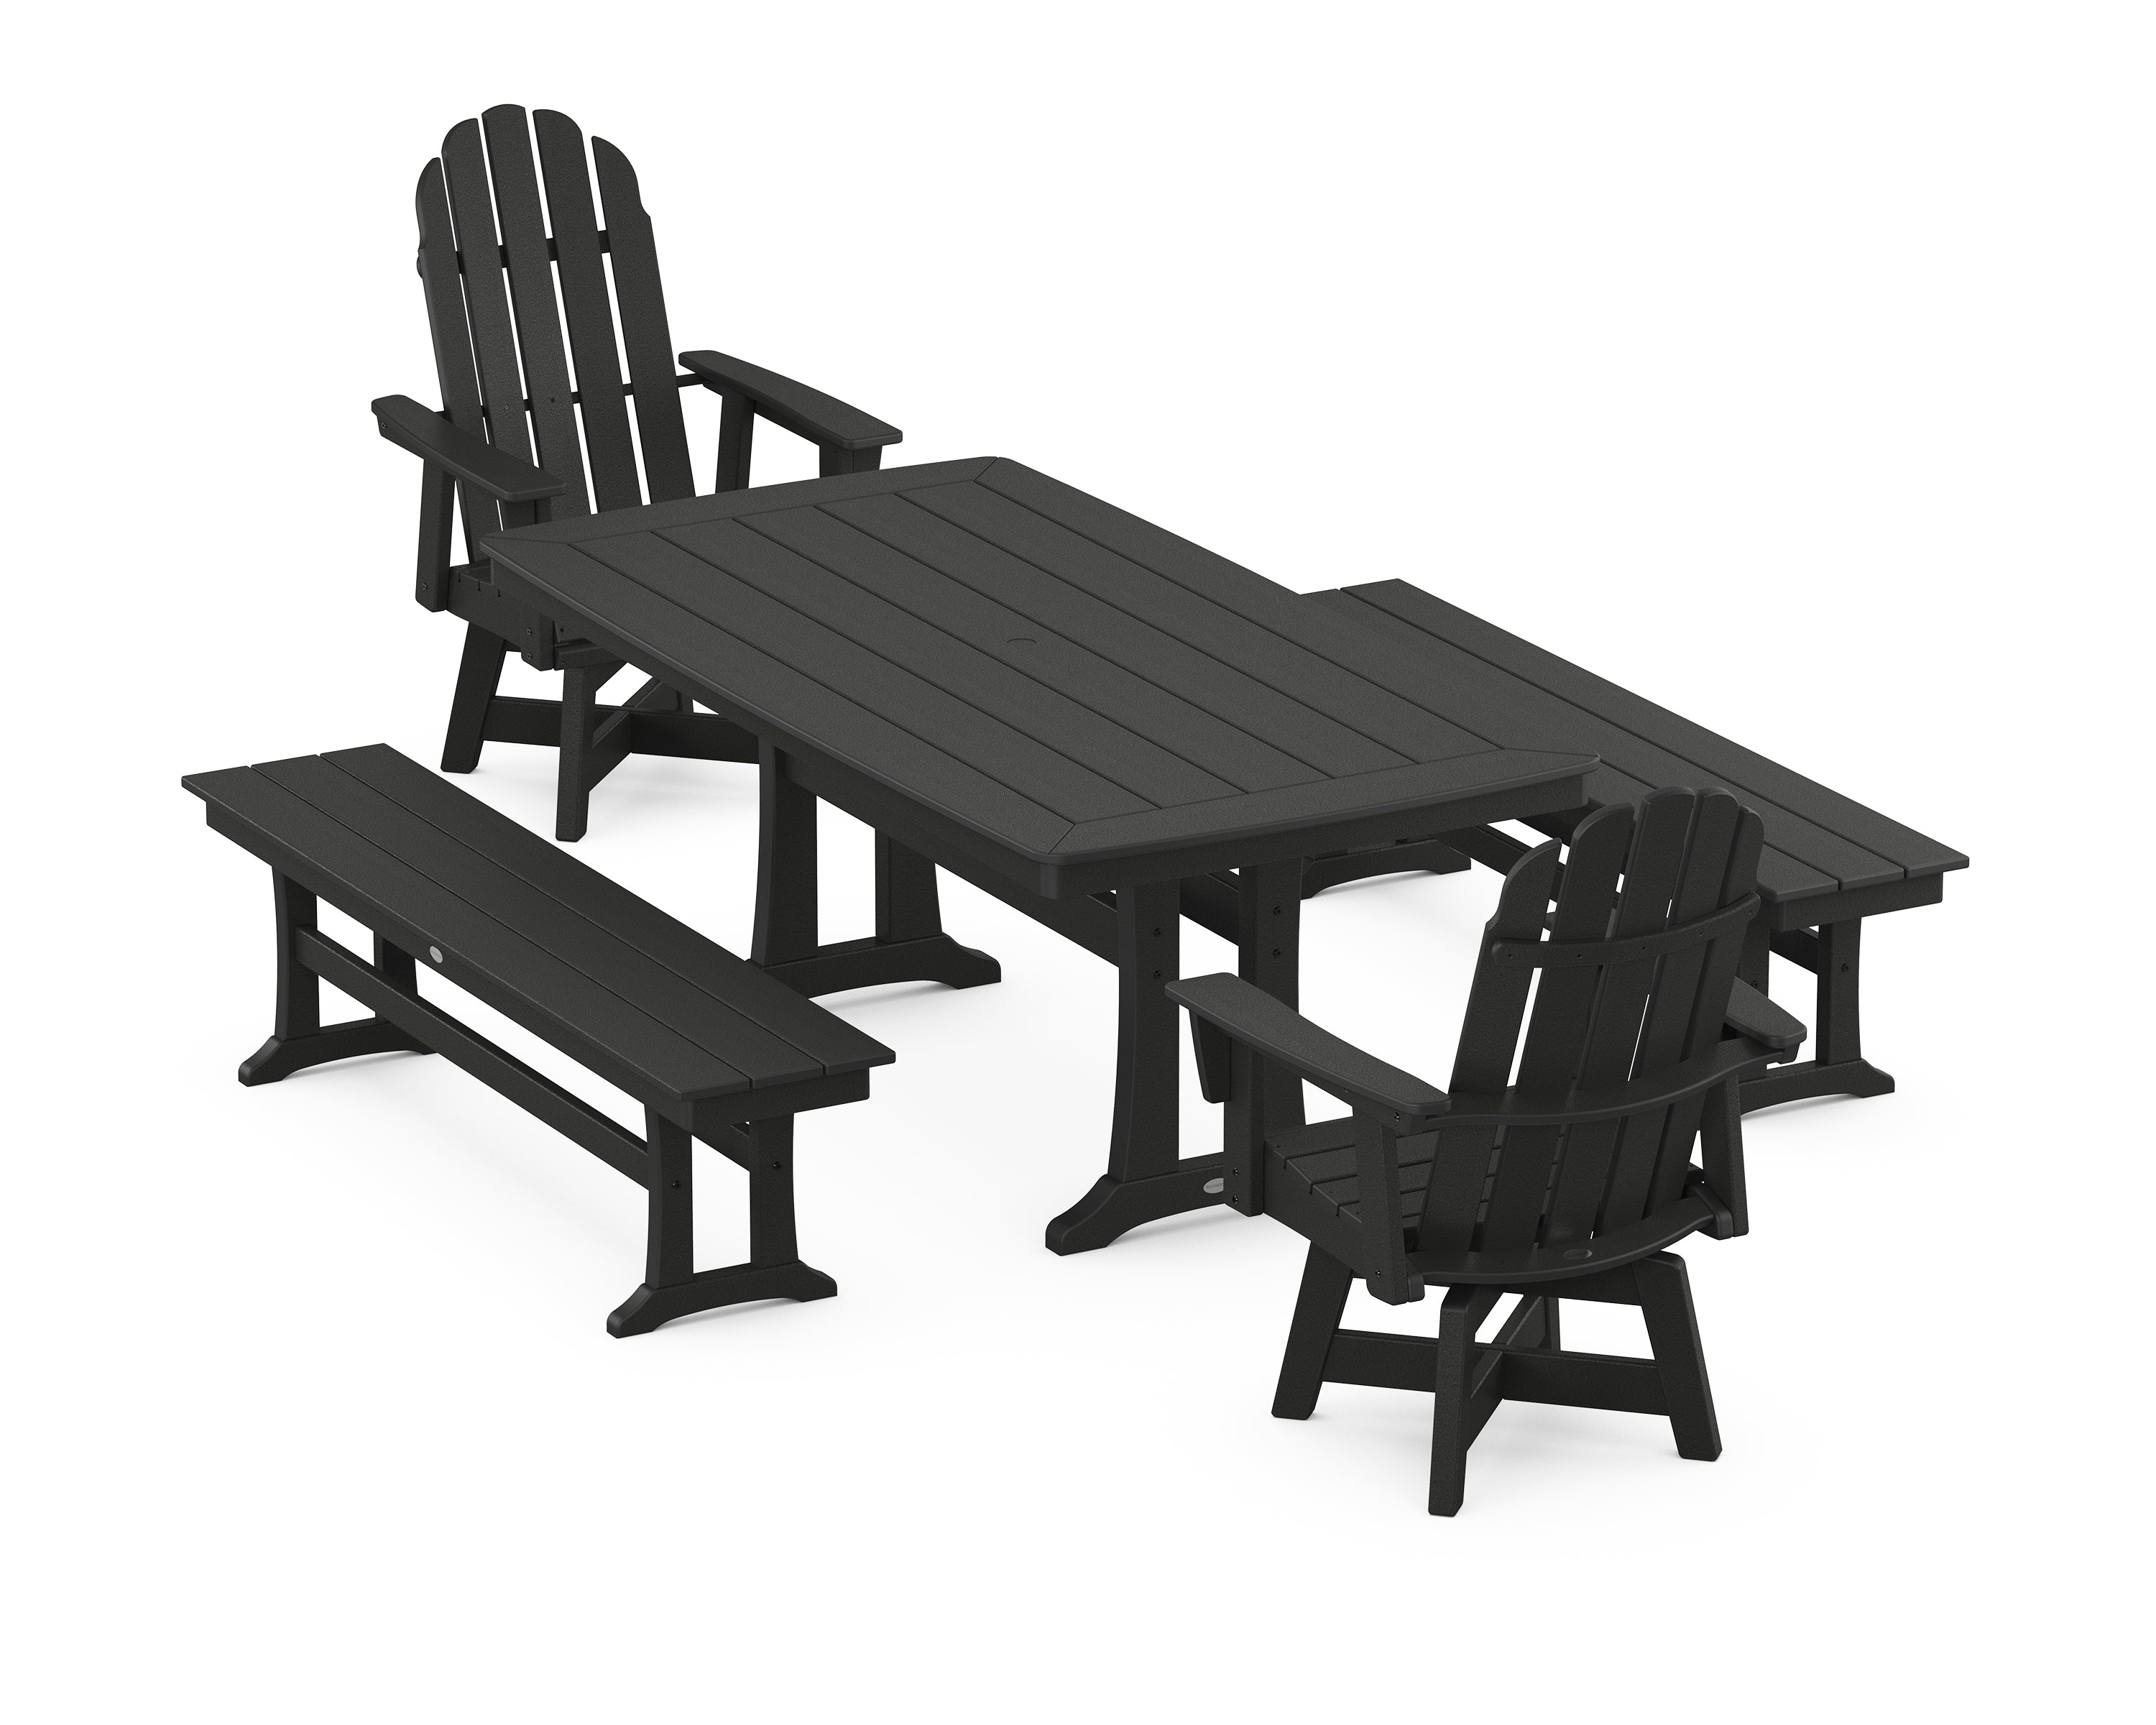 POLYWOOD® Vineyard Adirondack Swivel Chair 5-Piece Dining Set with Trestle Legs and Benches in Black